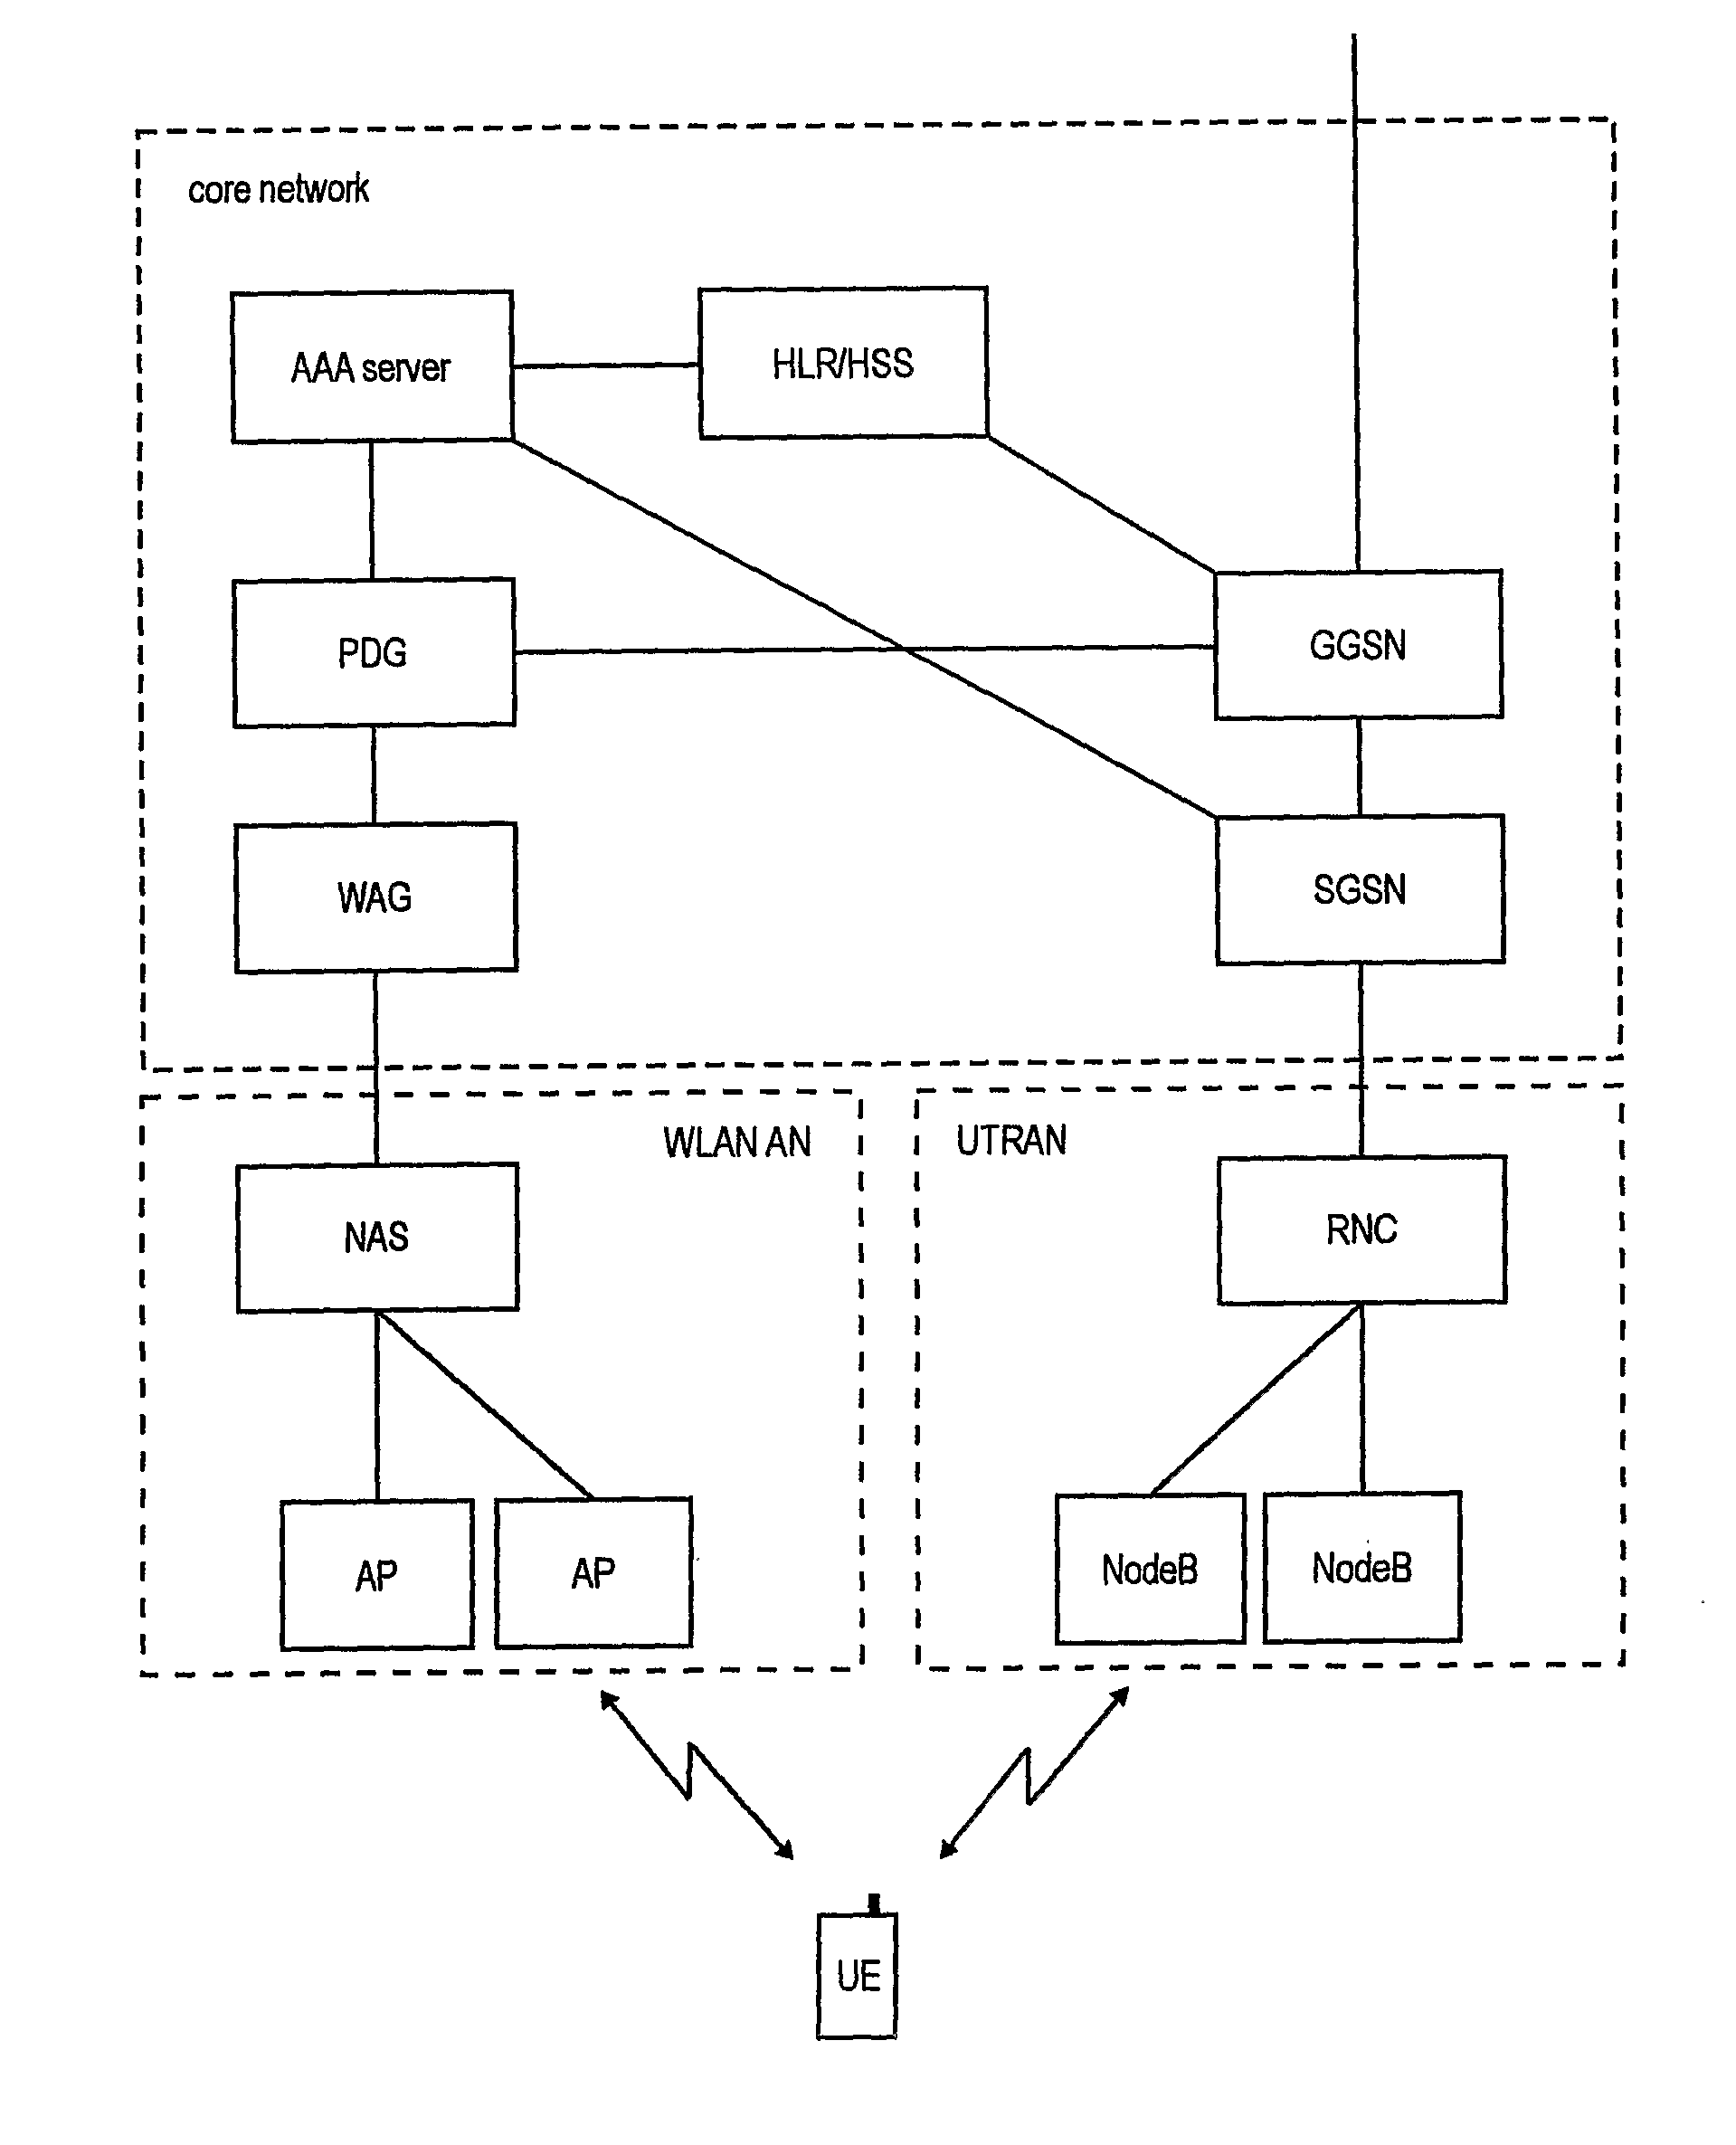 WLAN to UMTS handover with network requested PDP context activation